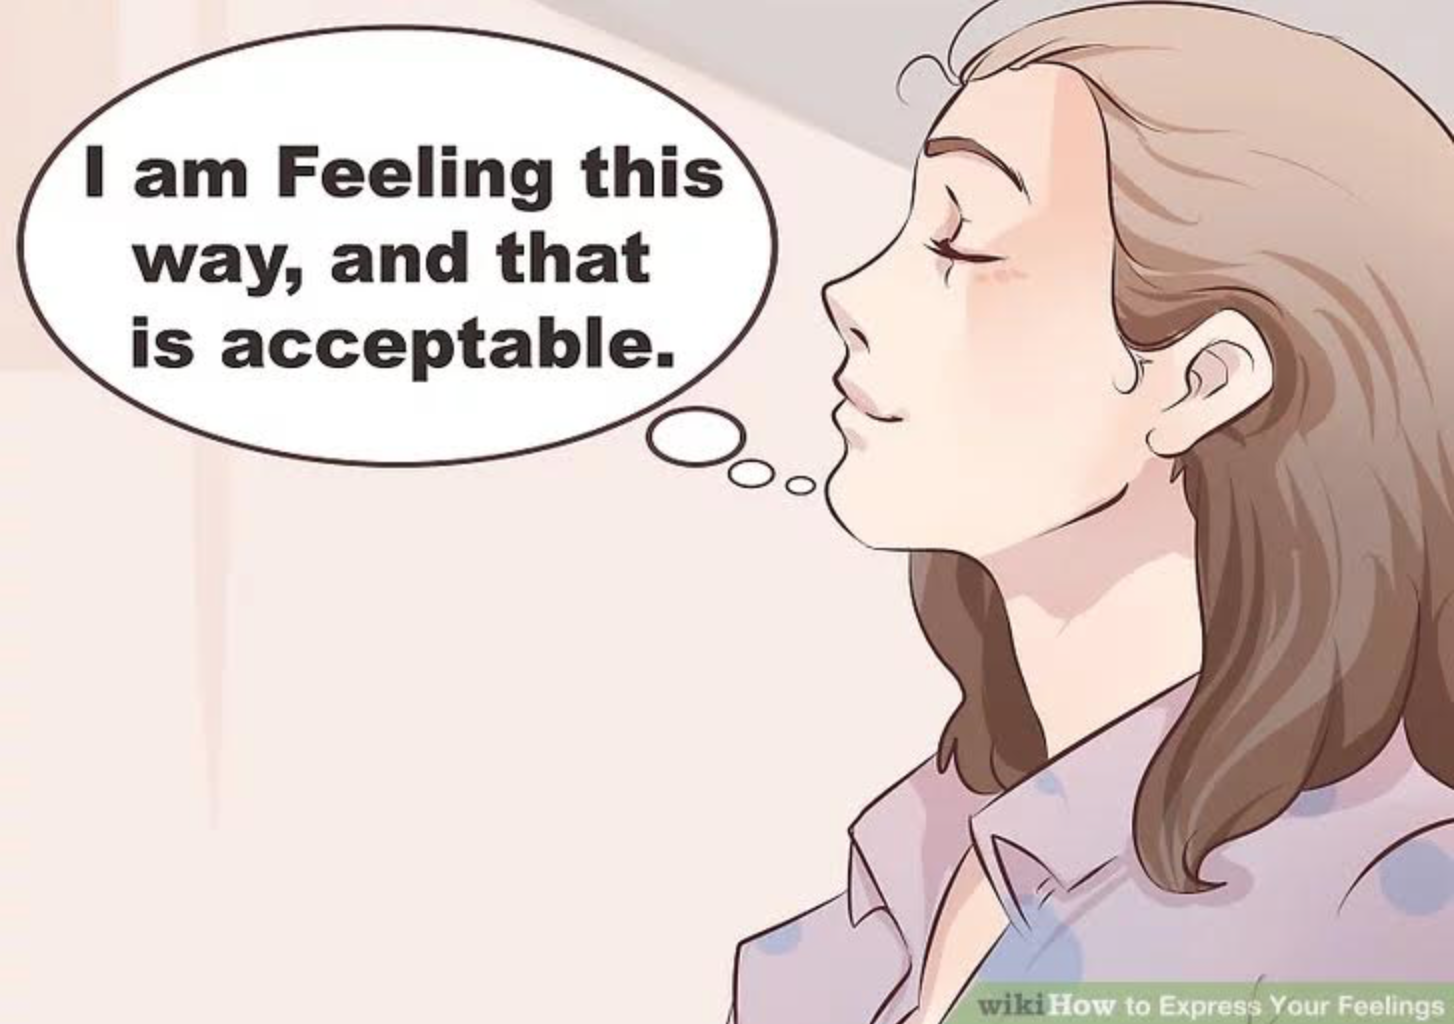 Feeling steps. Your feelings. Express your feelings. Feelings accept. How to Express feelings.